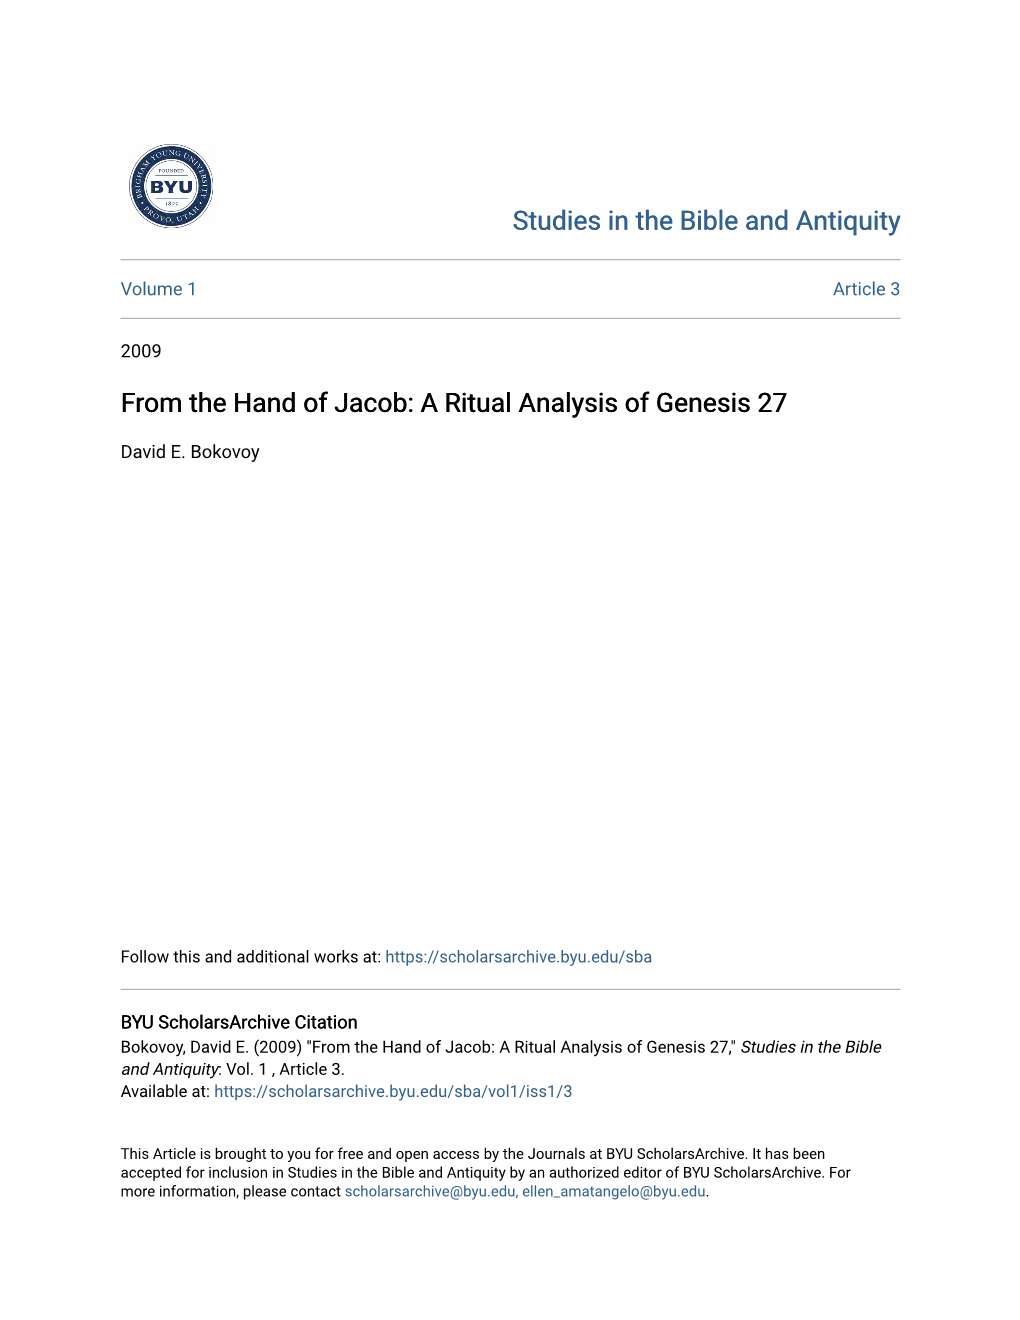 From the Hand of Jacob: a Ritual Analysis of Genesis 27